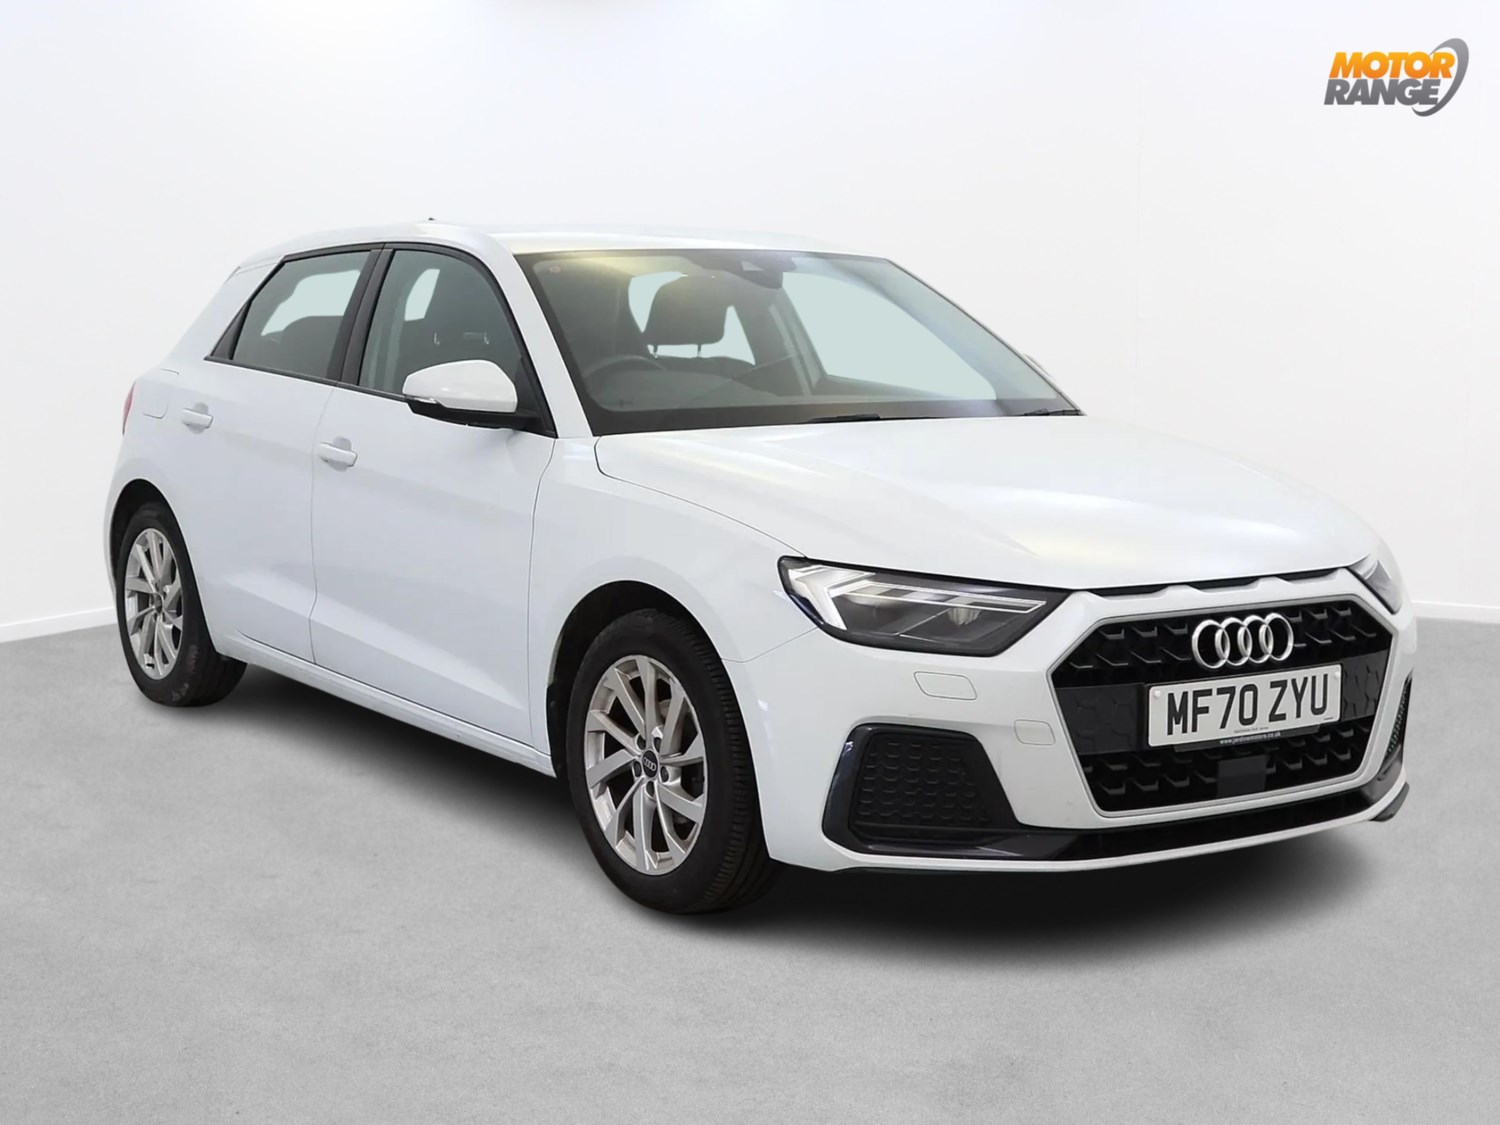 2021 used Audi A1 25 TFSI Sport 5dr [Tech Pack]